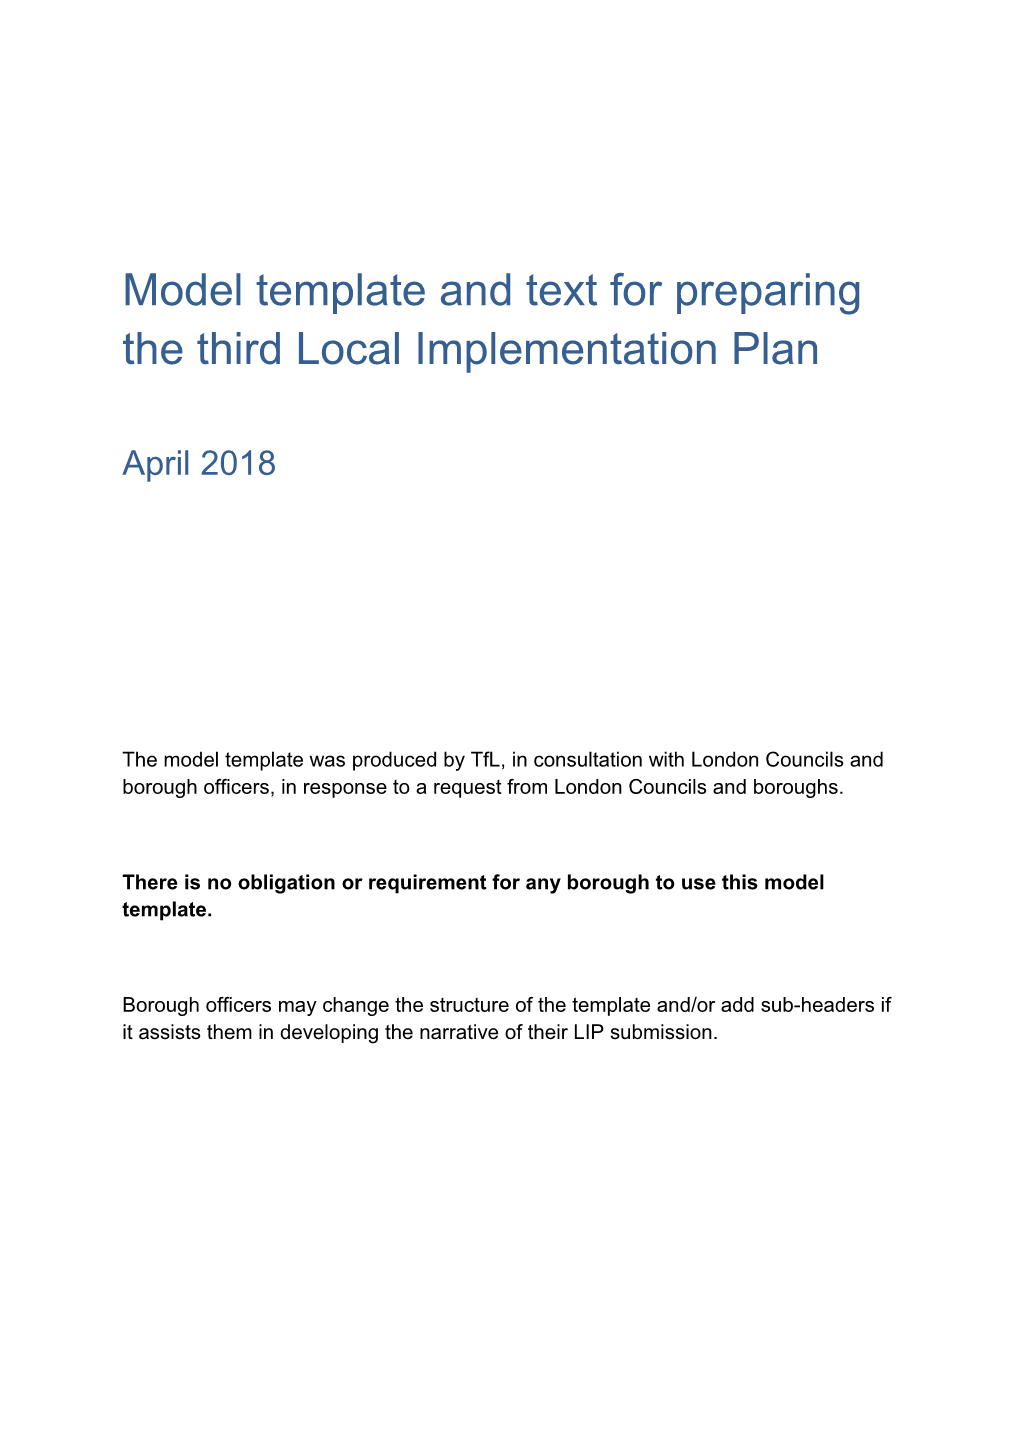 Model Template and Text for Preparing the Third Local Implementation Plan